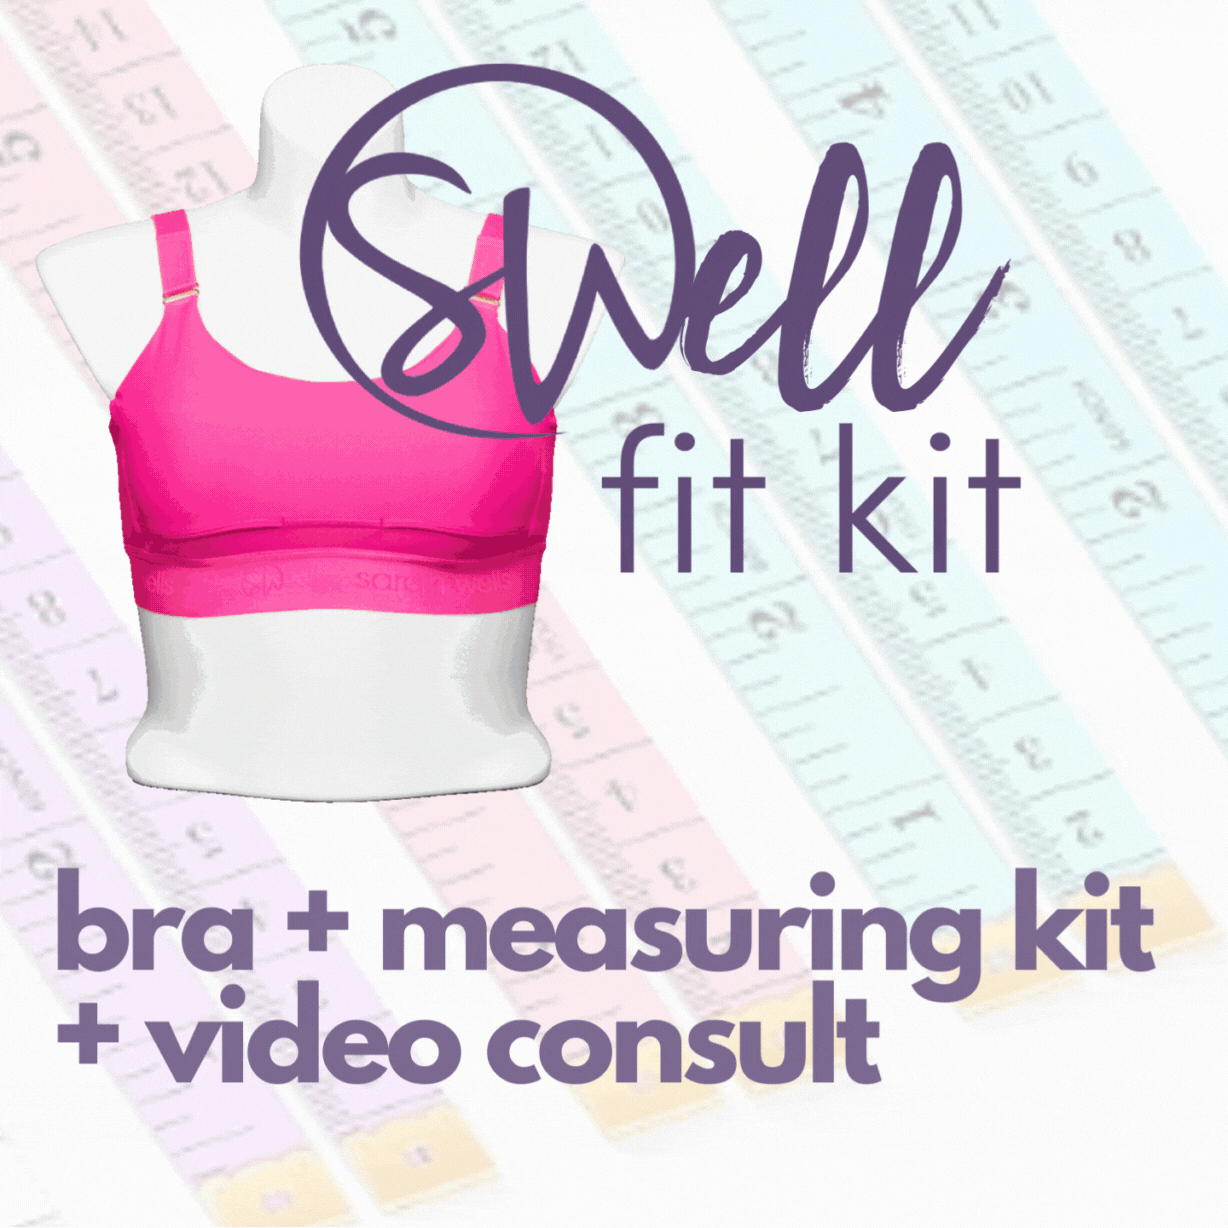 Journey Pumping Bra with "SWell Fit Kit" - Bra + Measuring Kit + Video Consult